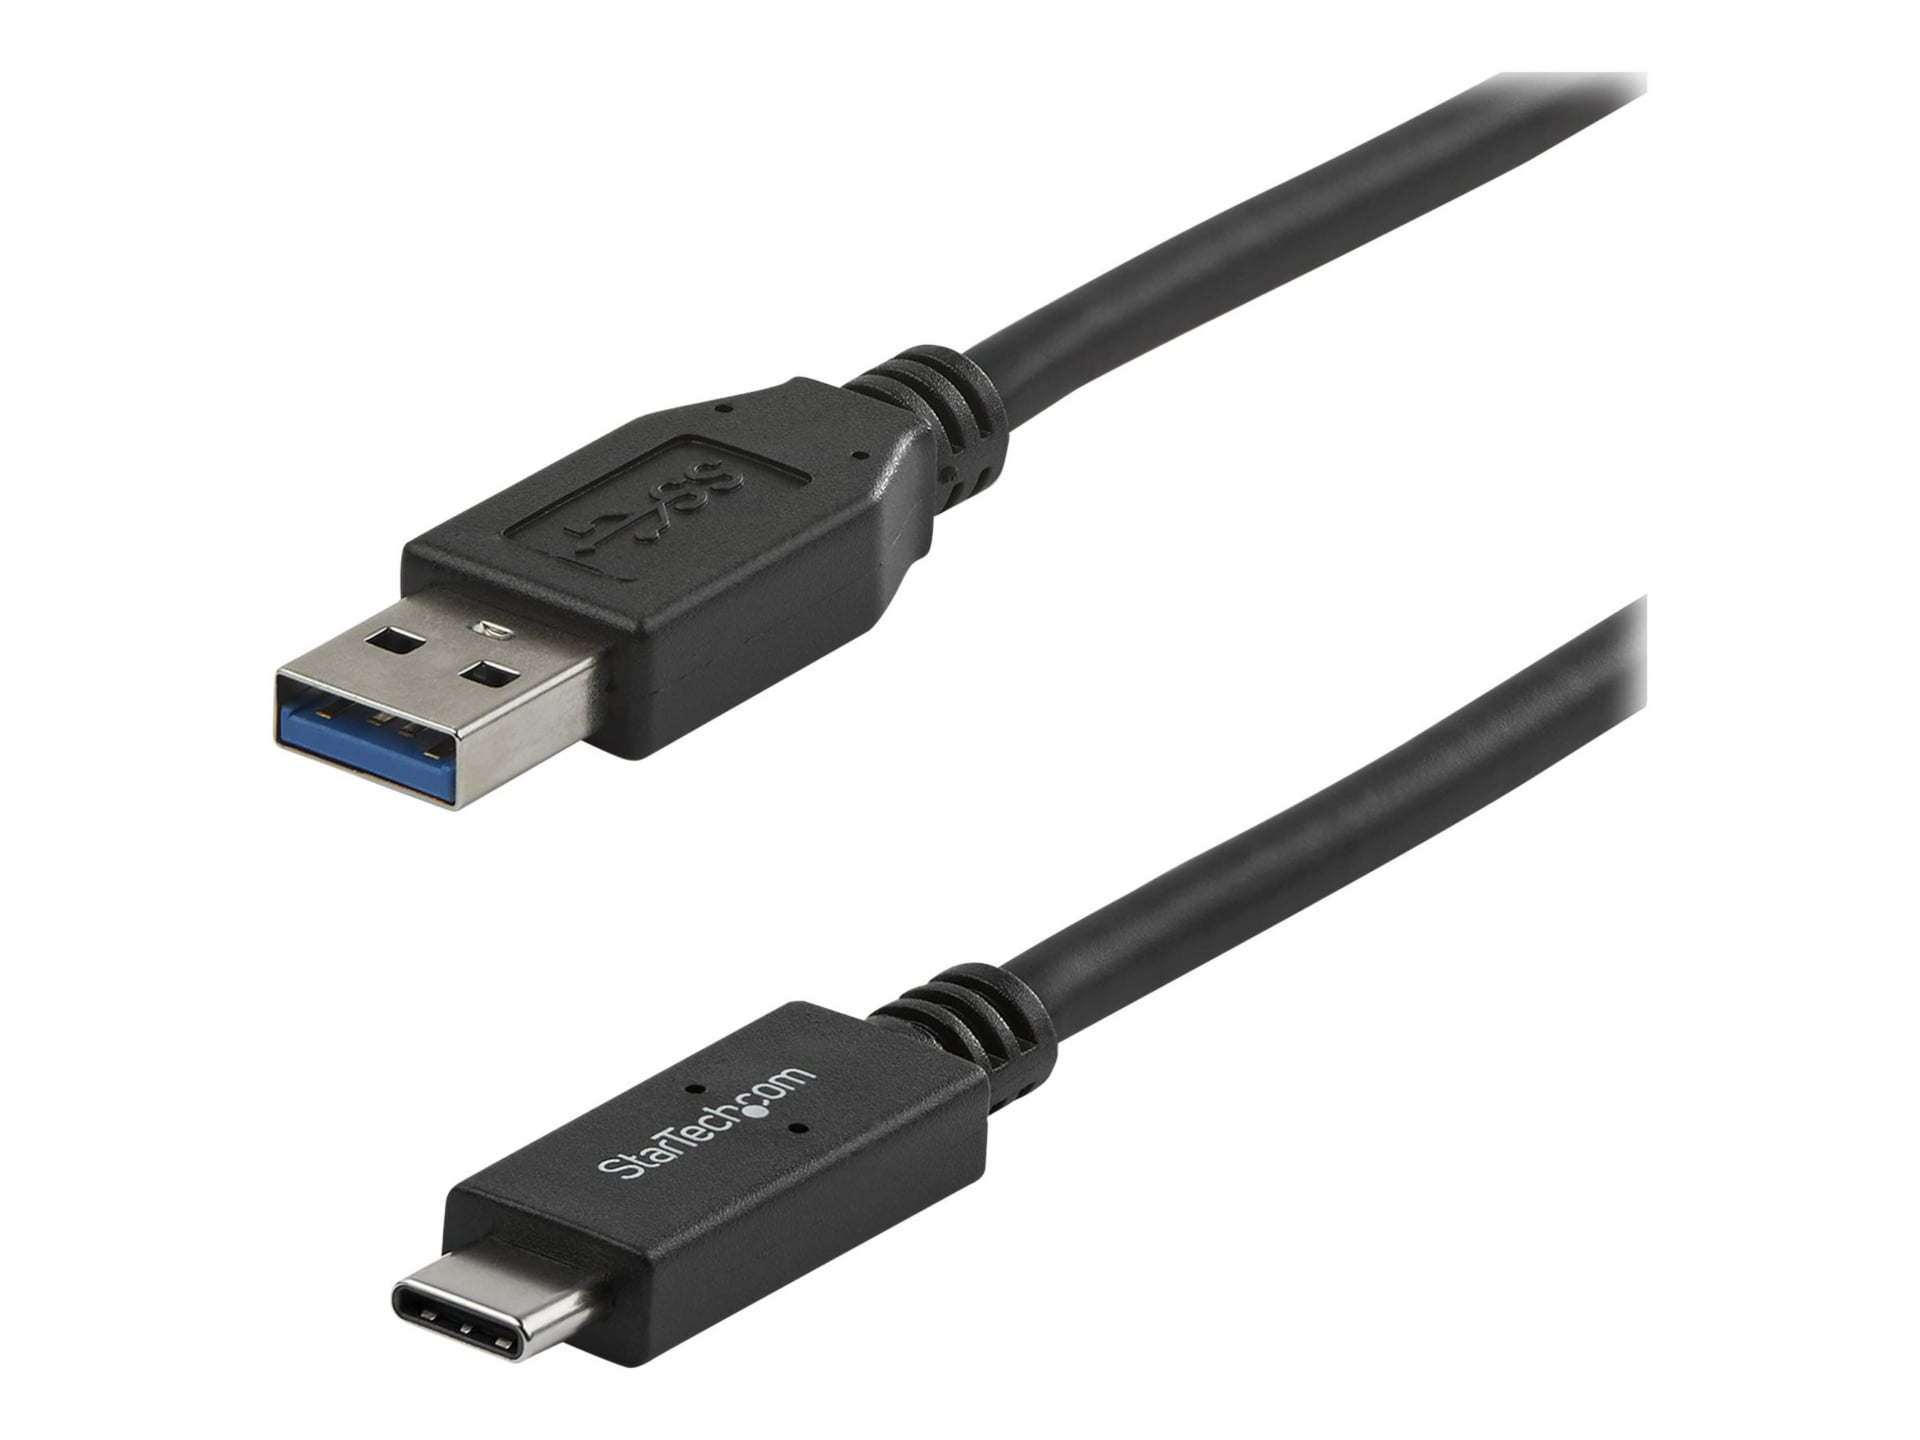 CABLE USB TIPO C 1M